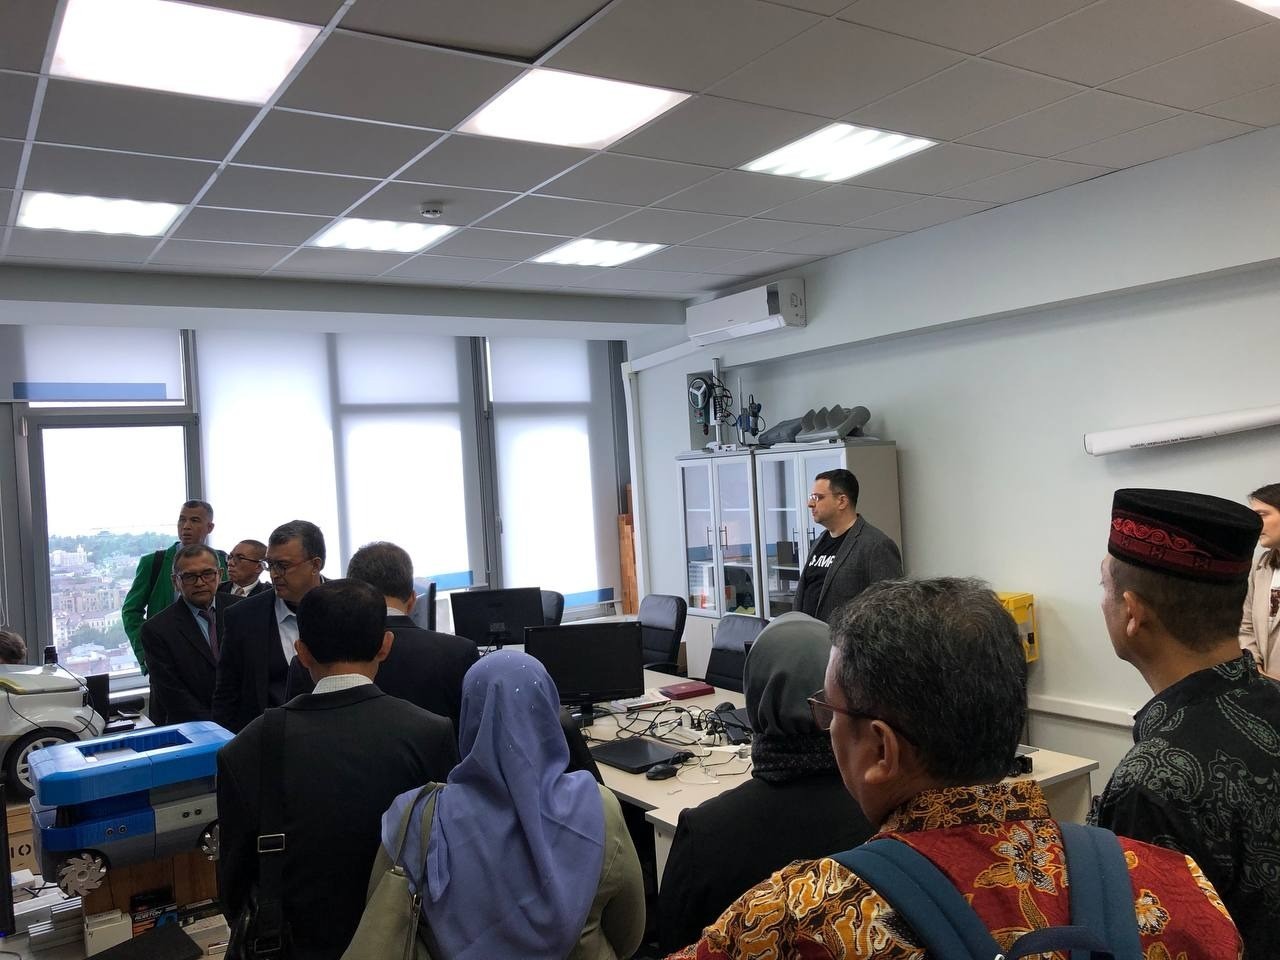 Delegation from Indonesia visited Laboratory of Intelligent Robotics Systems